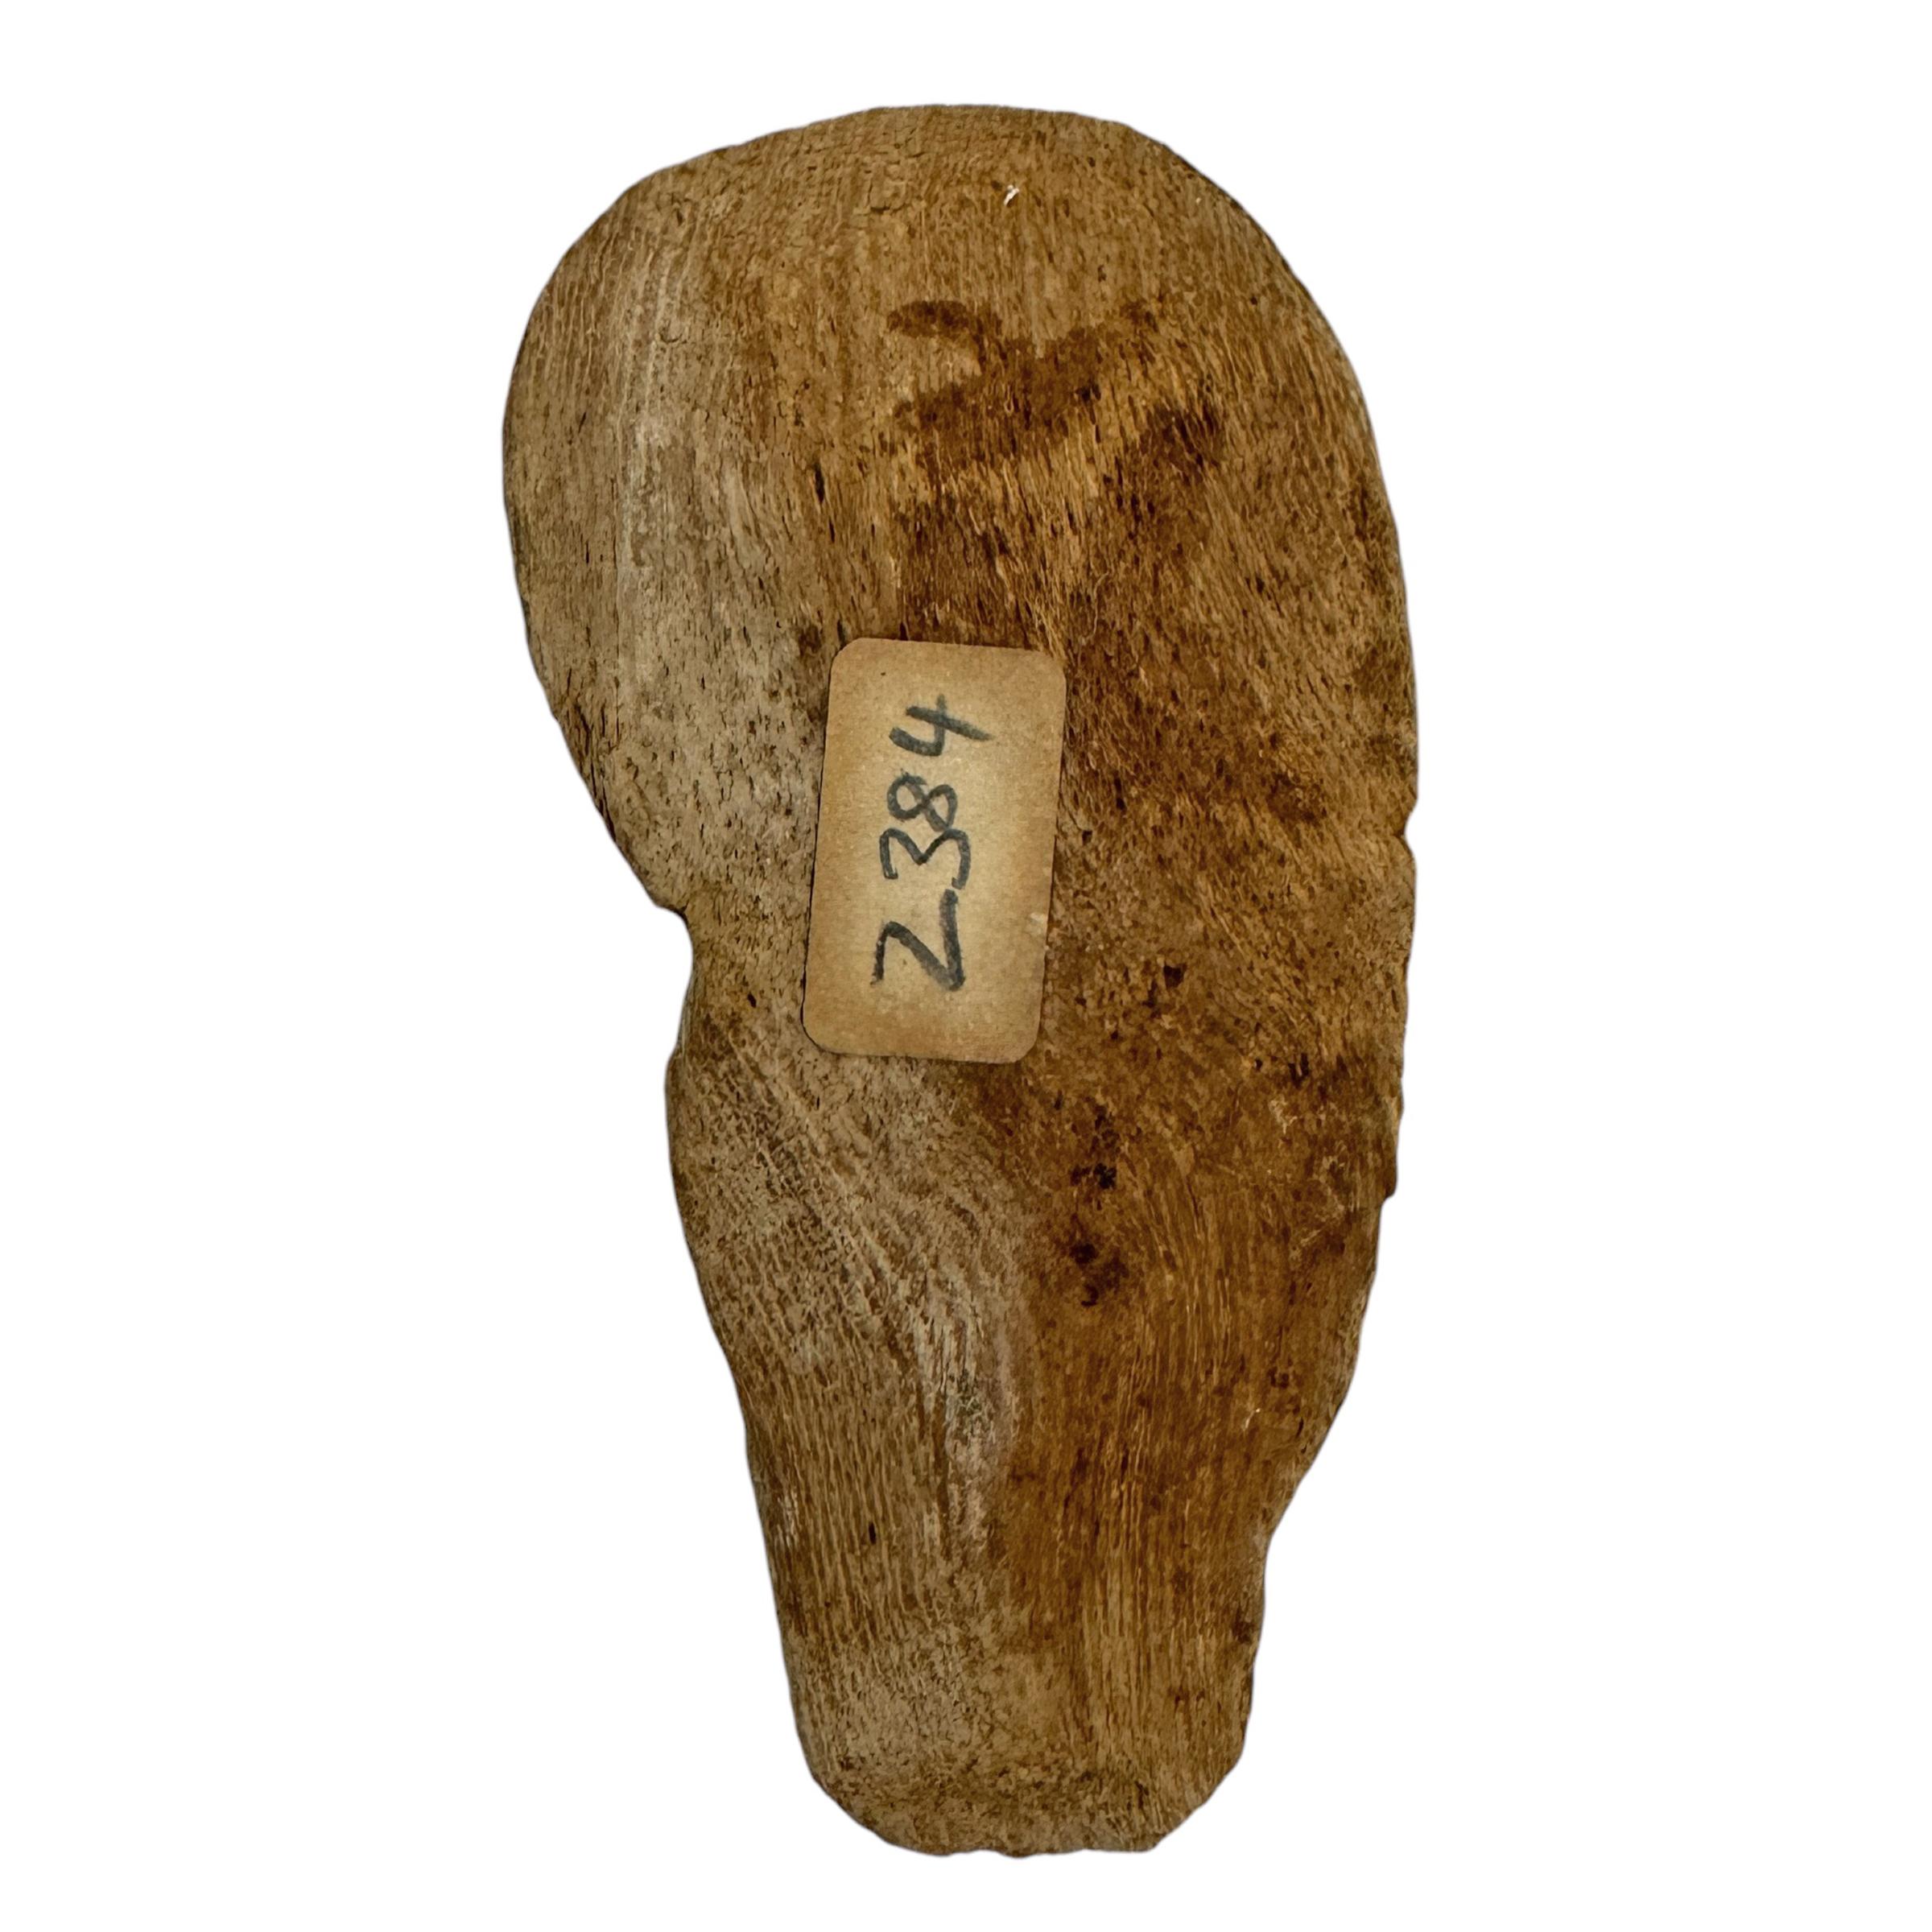 Late-Period to Ptolemaic Period Egyptian Wooden Mummy Mask Ear on Custom Mount For Sale 3